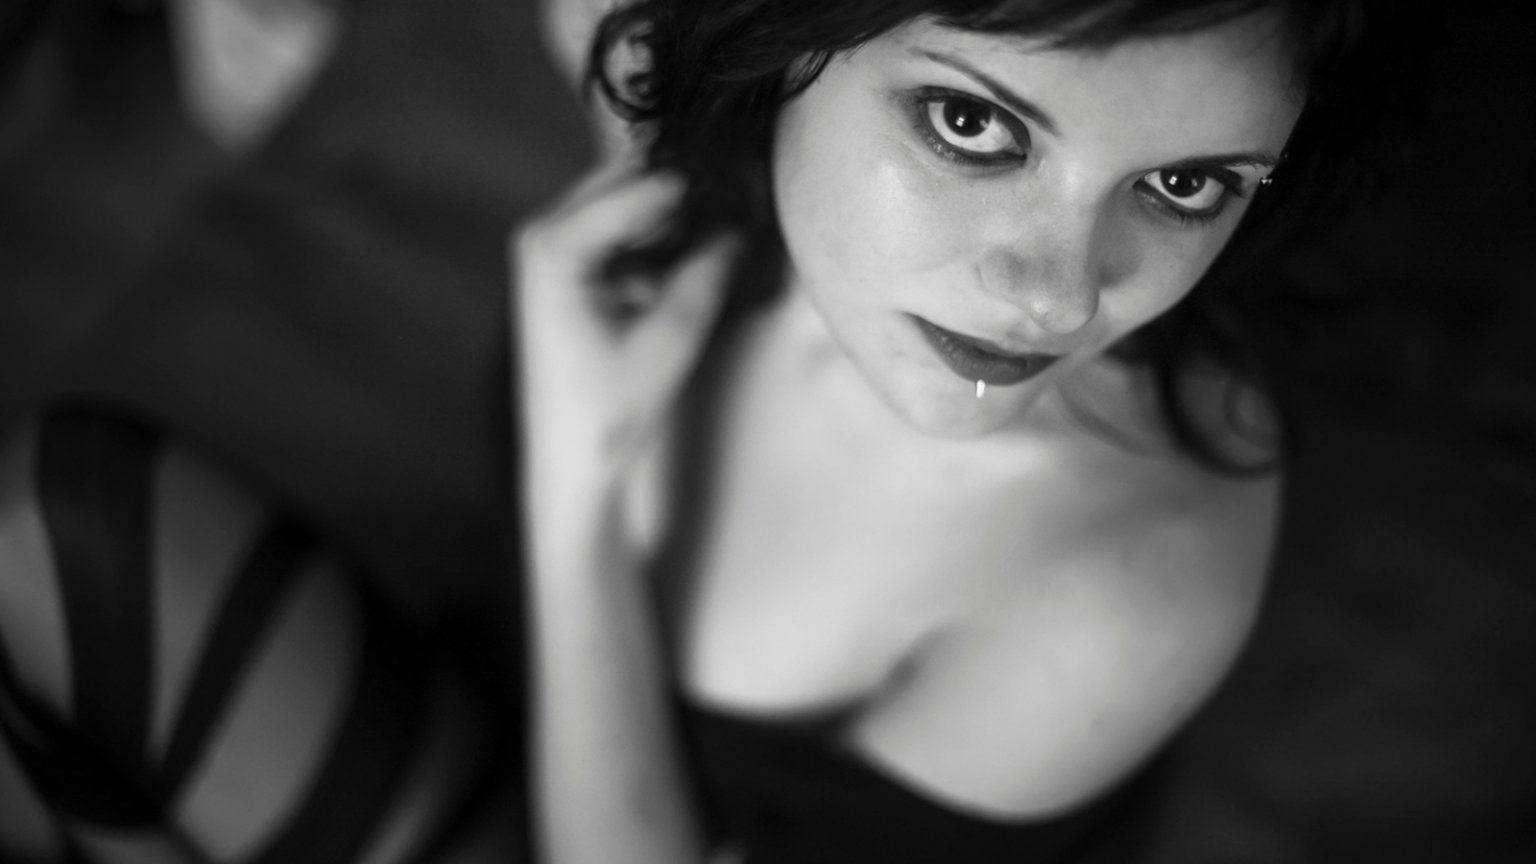 Black and white photo of a plus size feminine person looking at the camera with a somber expression